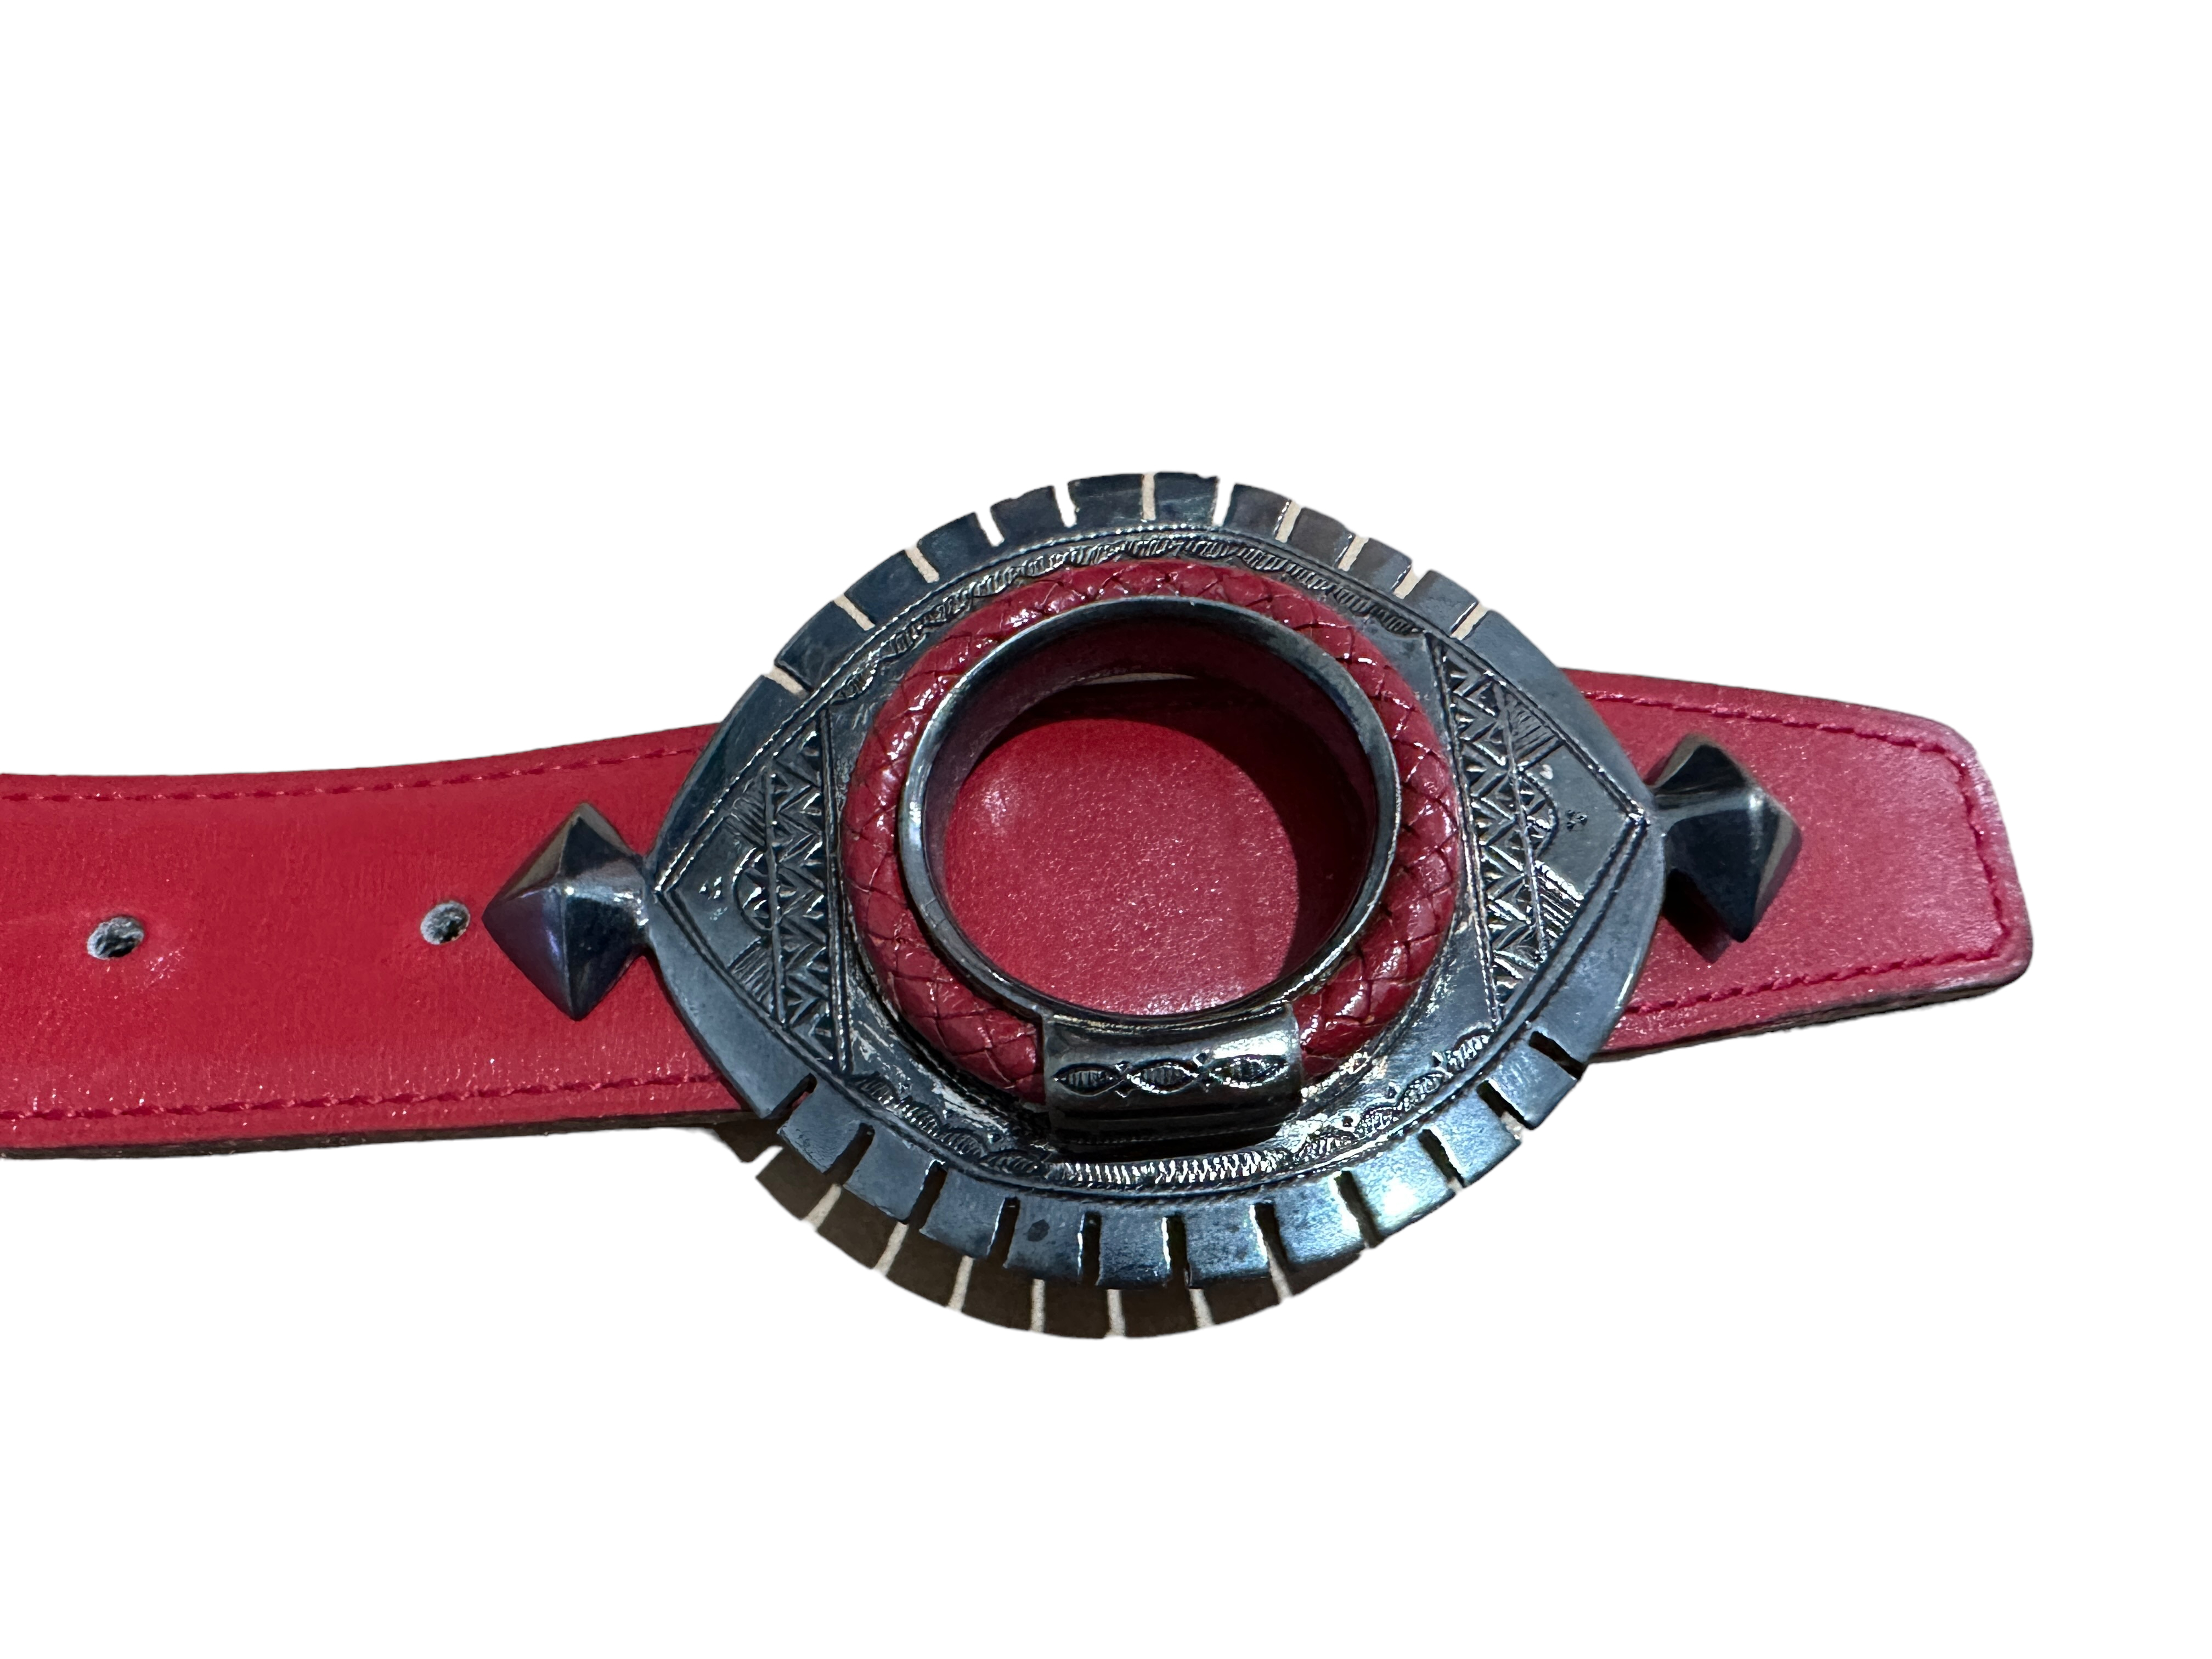 Vintage Bagged Hermes Leather Belt - 33 3/4" long-vendor states that Buckle is a one off. - Image 6 of 9